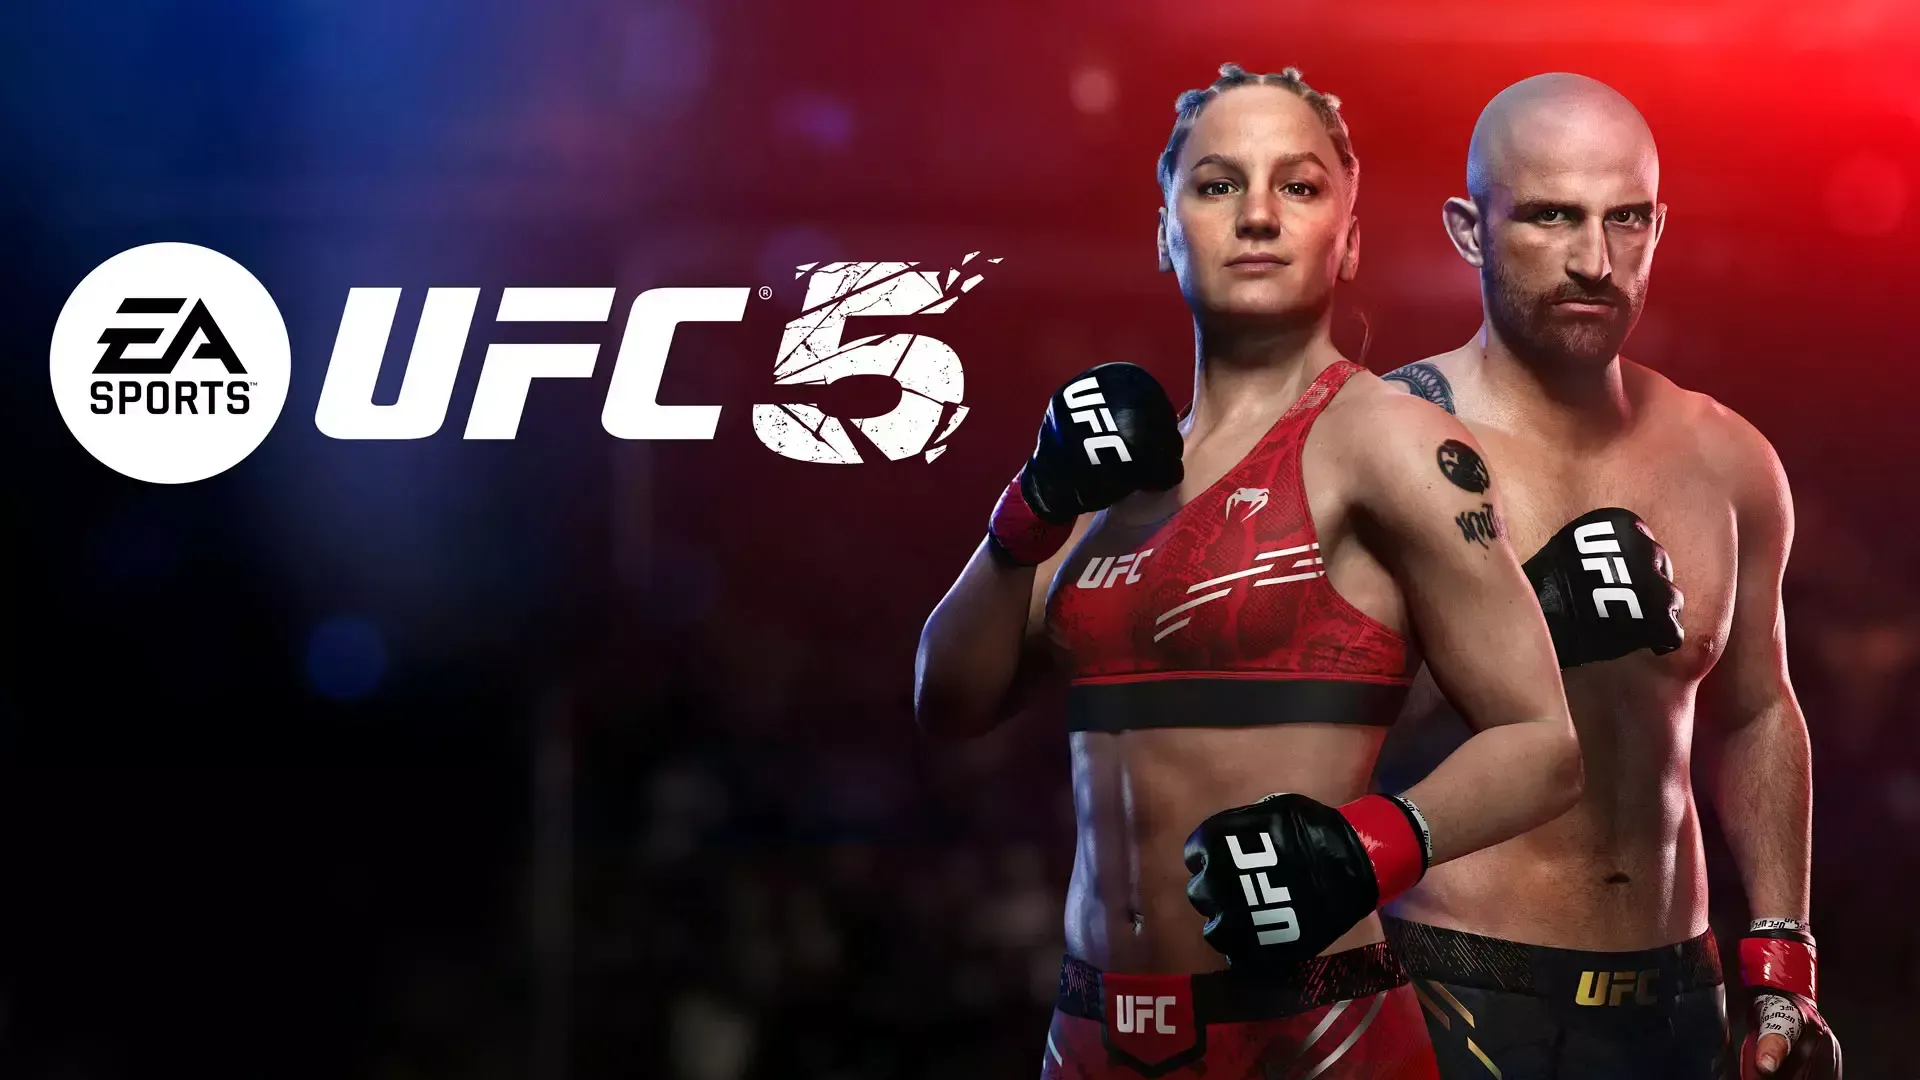 Artwork from UFC 5. Image: EA Sports